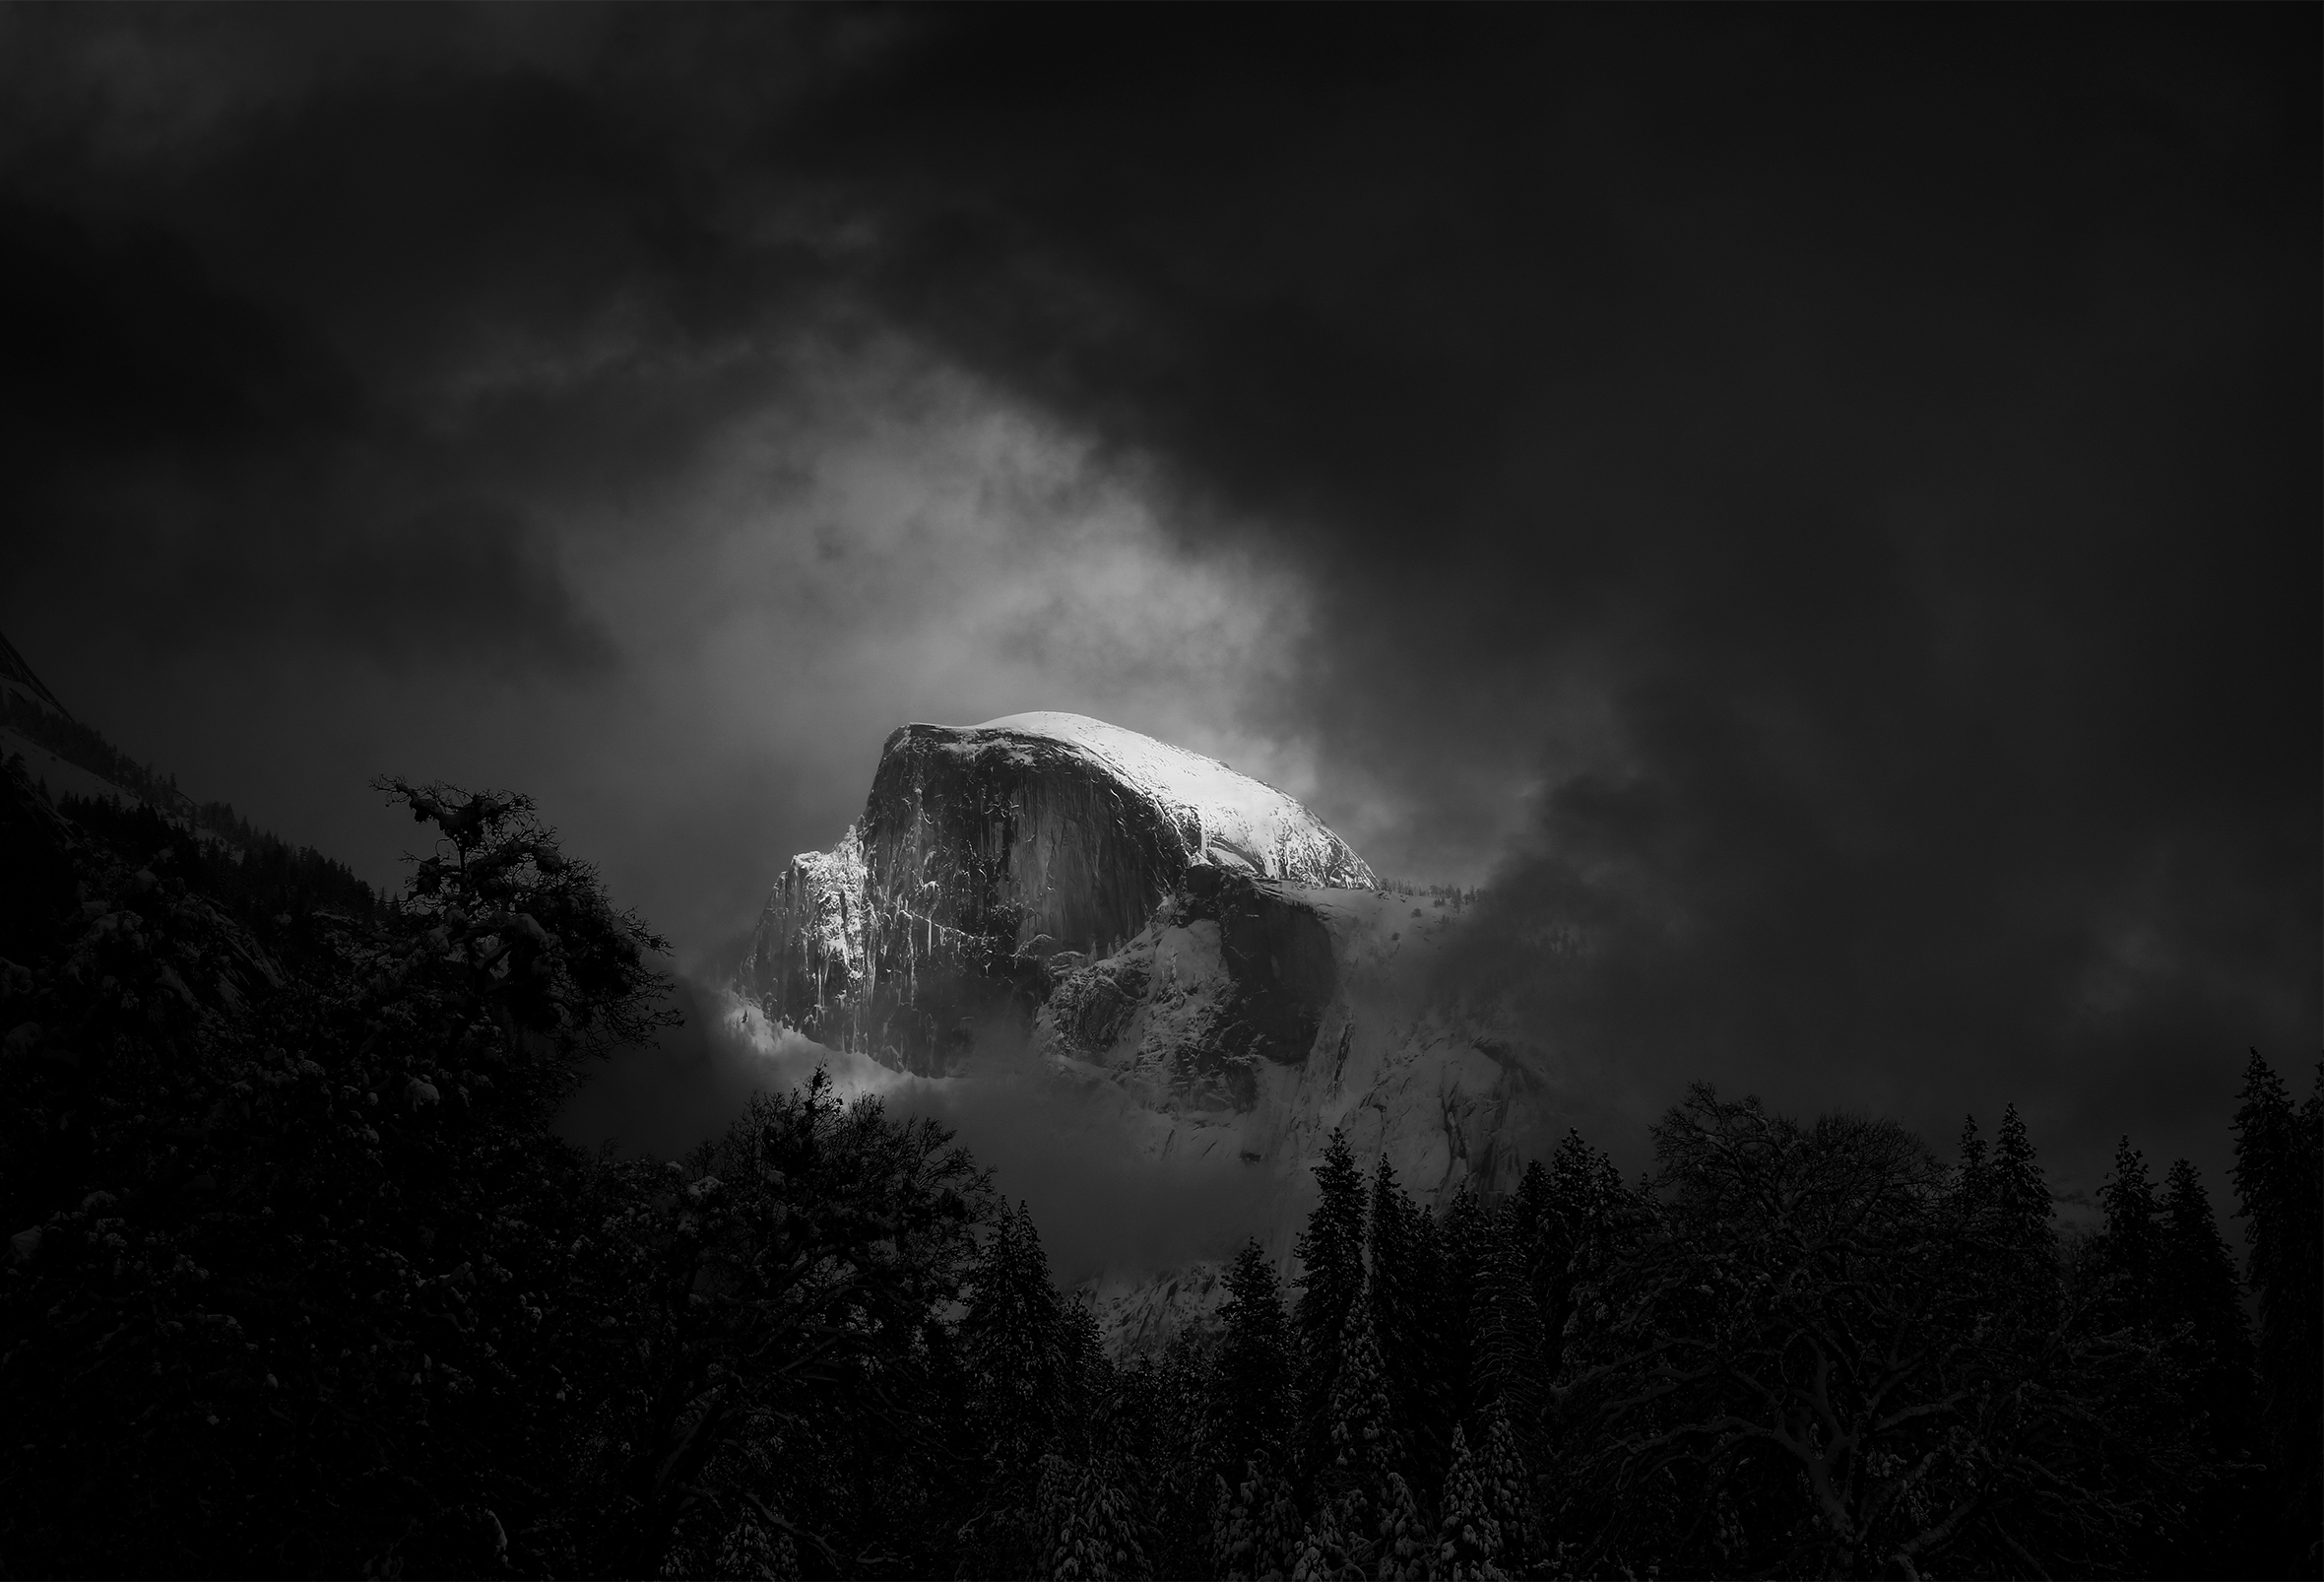 Treetops compose the foreground and provide framing for the sheer face of Half Dome at Yosemite National Park in California. Dark storm clouds surround the rock formation and fill the sky.